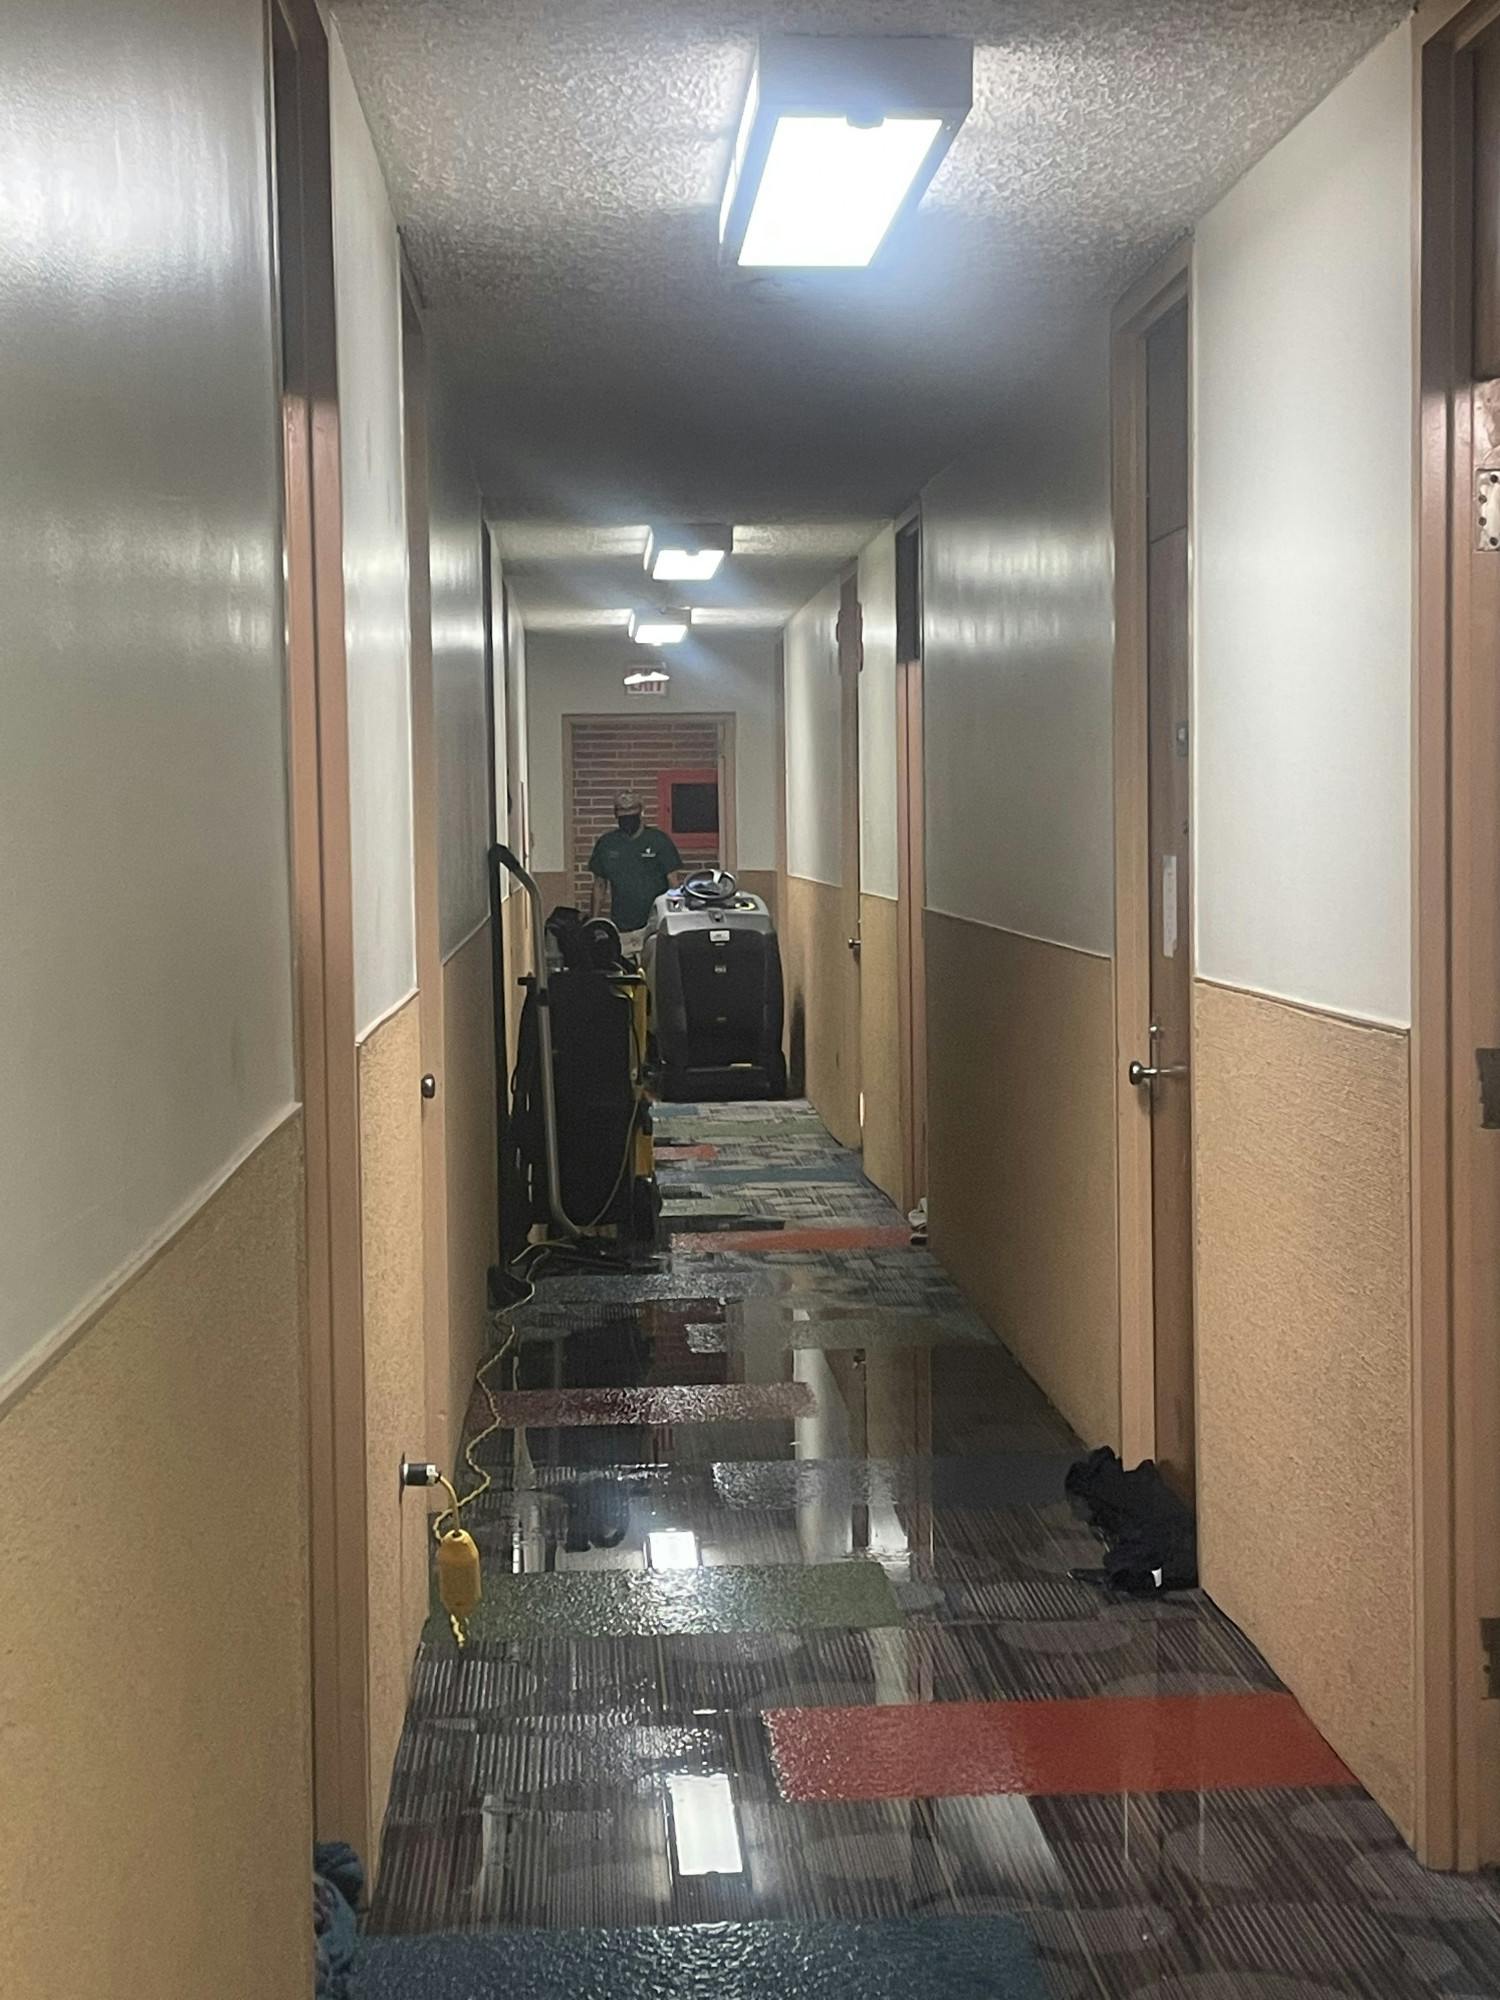 <p>Fourth floor West McDonel Hall residents awoke to find the hall completely flooded on Oct. 21. The source was a toilet in one of the rooms.</p>